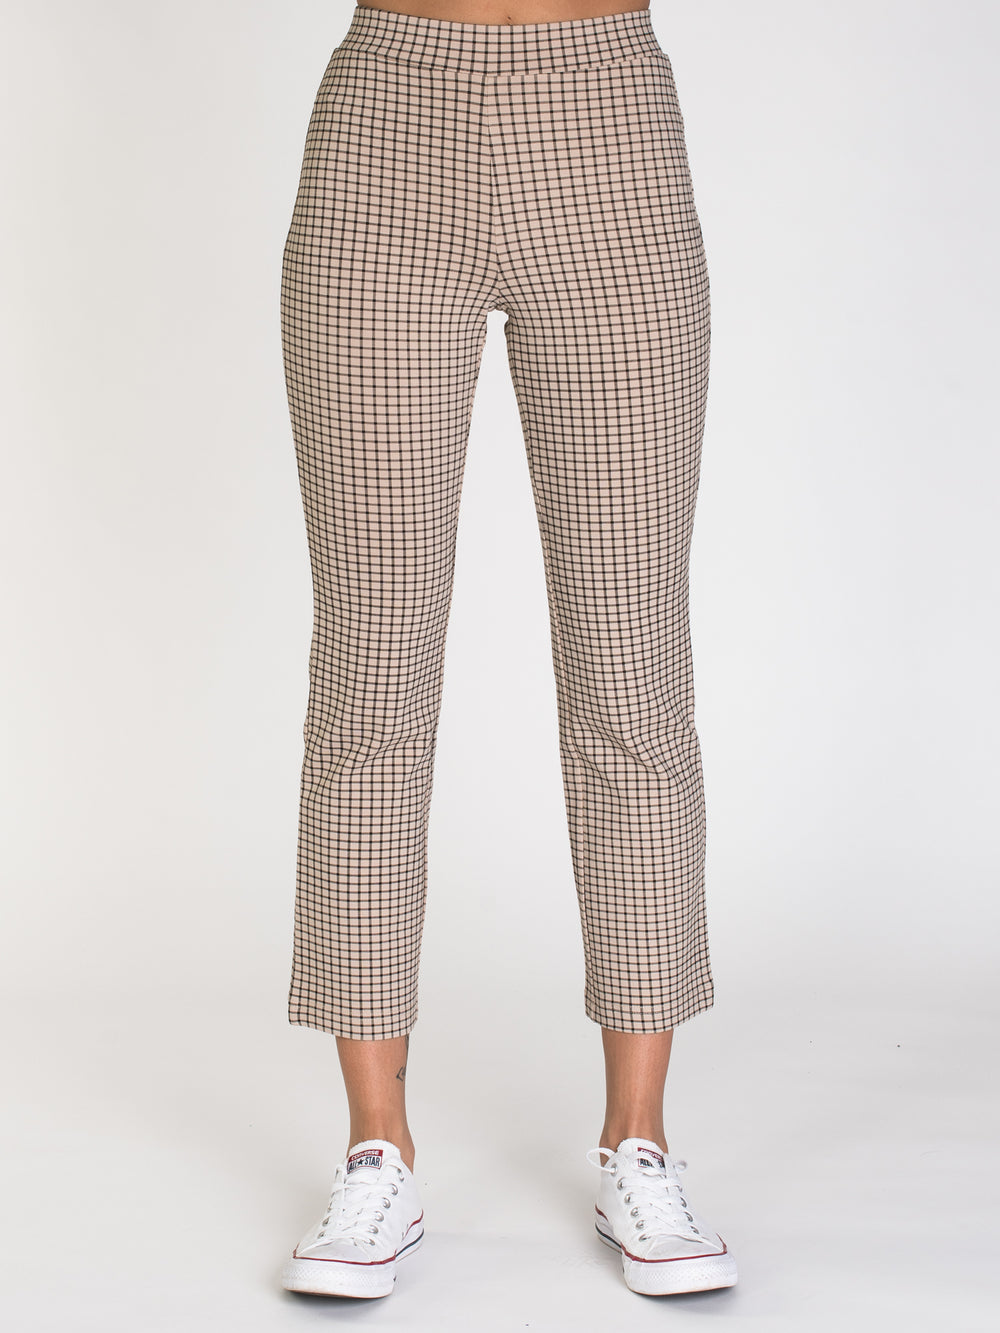 HARLOW QUINN PULL ON PANT - CLEARANCE